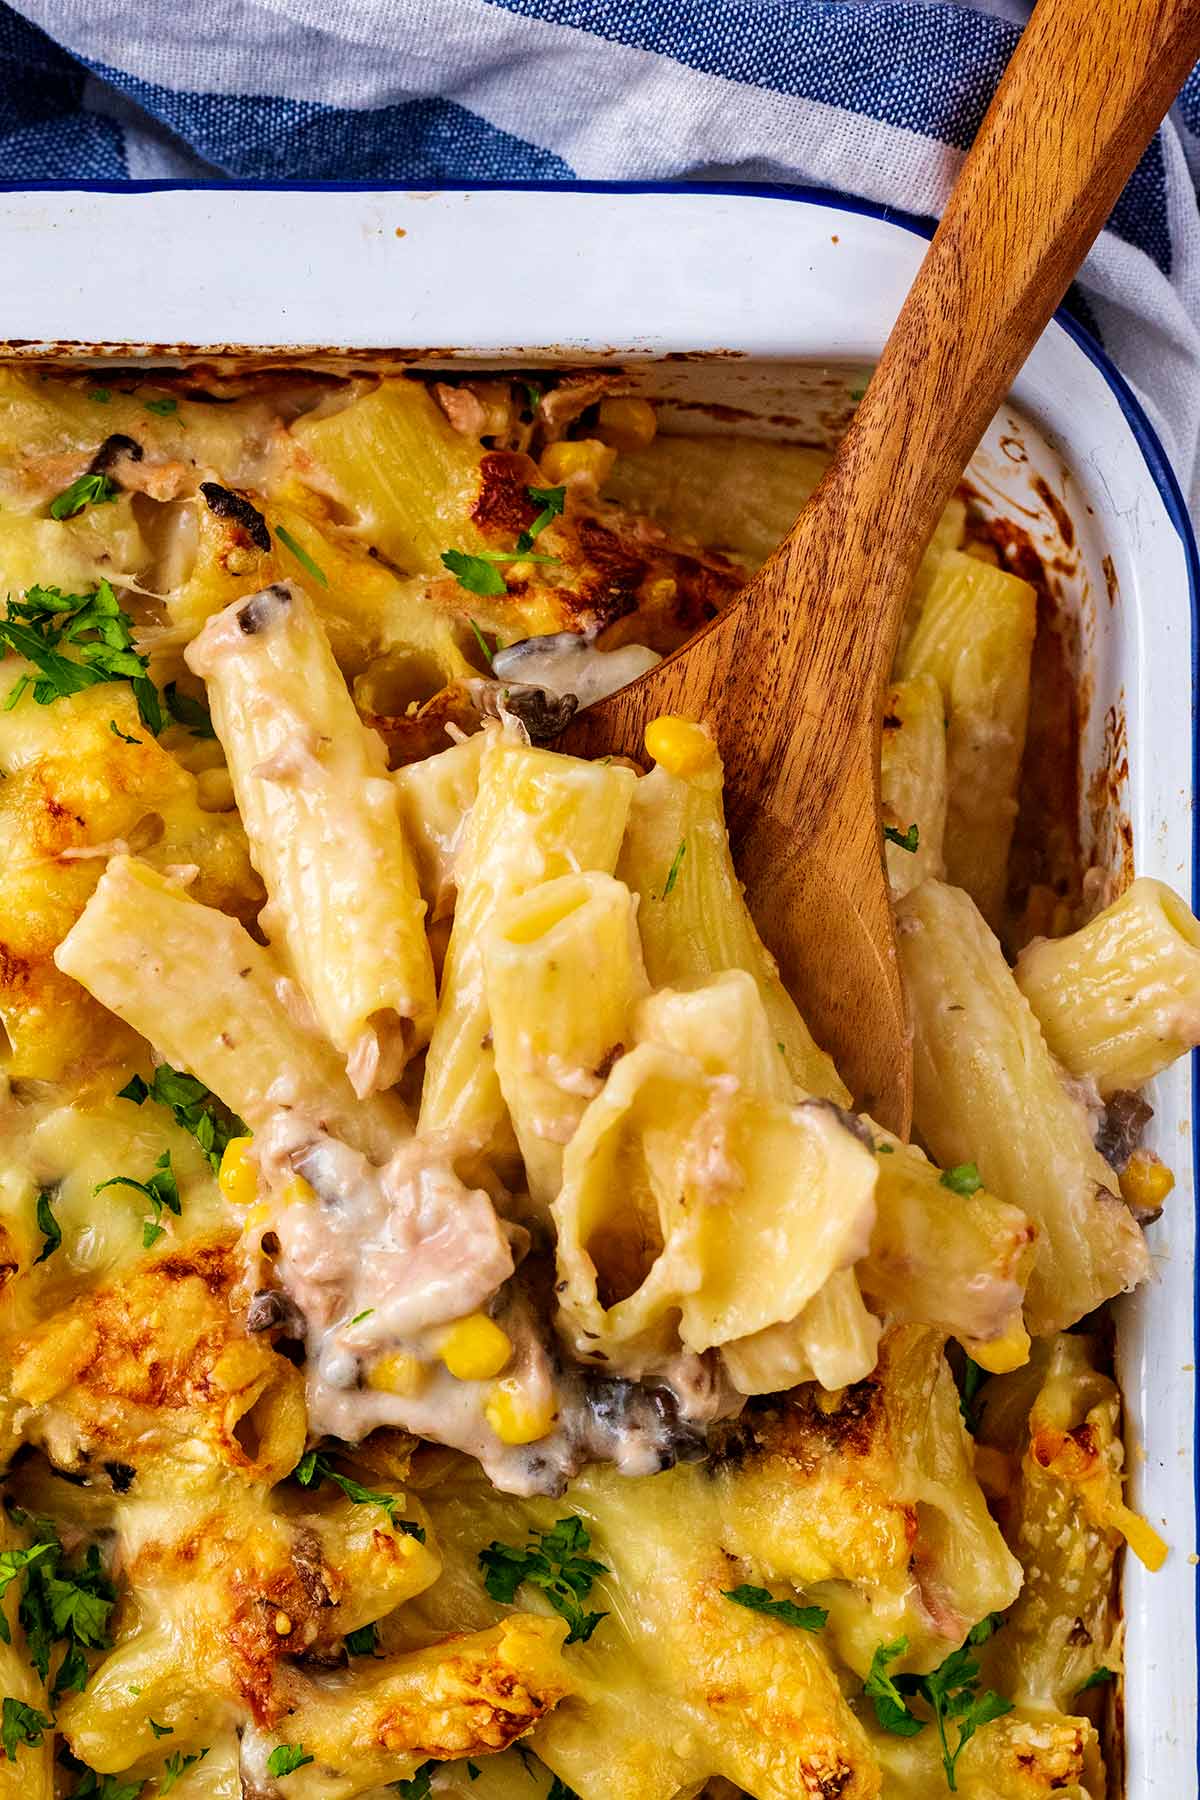 A wooden spoon in a portion of pasta bake.